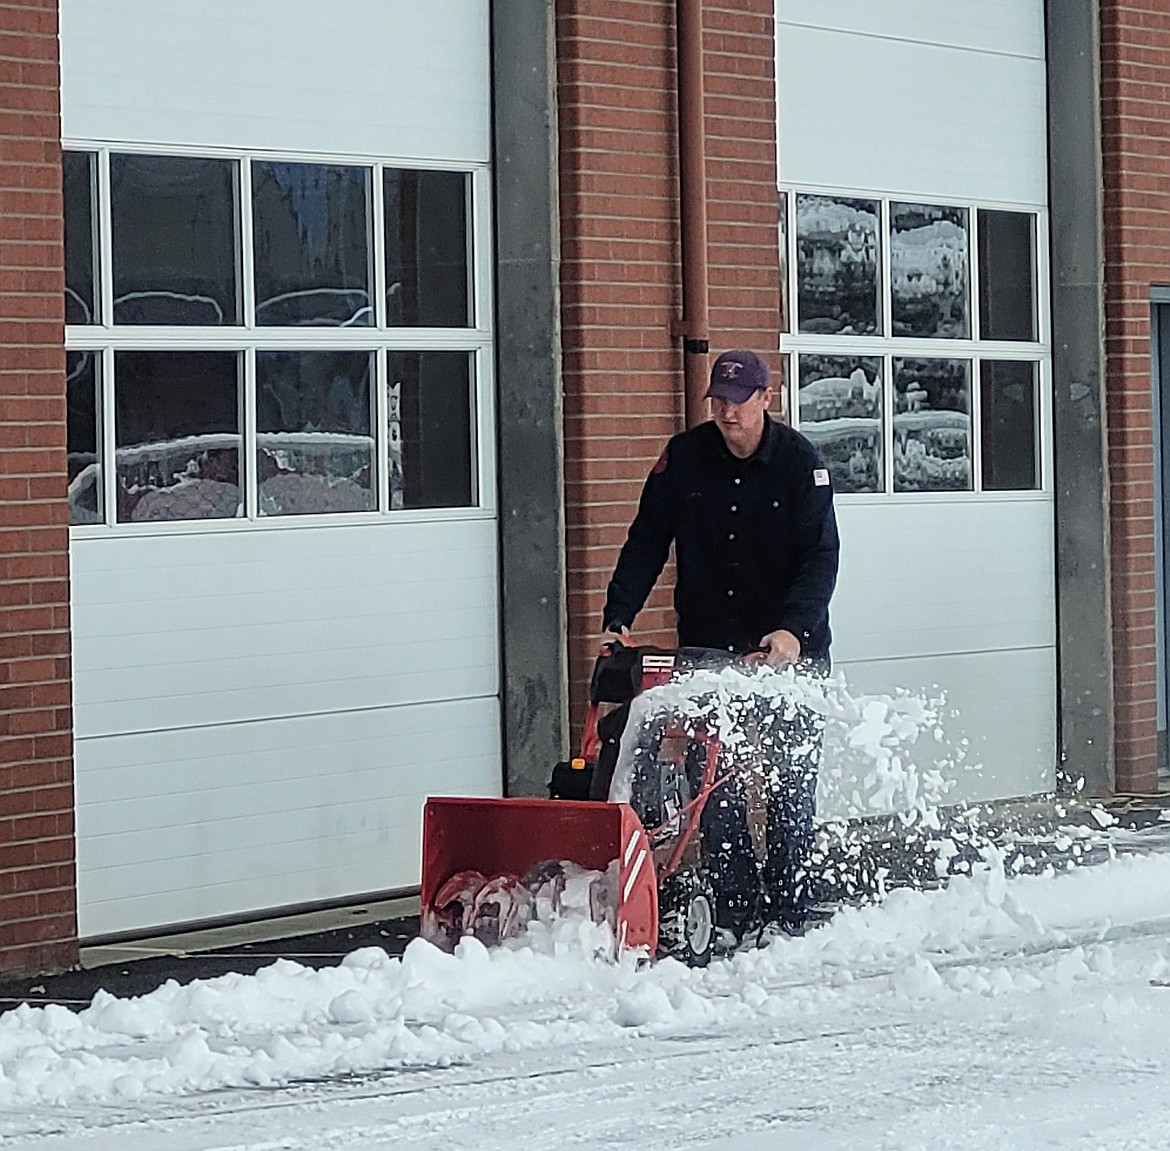 Firefighter Brian Russel runs a snowblower Wednesday morning to clear the snow from in front of bays at the city's fire station on Third Avenue. Keeping snow out of the way is part of ensuring first responders can get to those in need of aid.